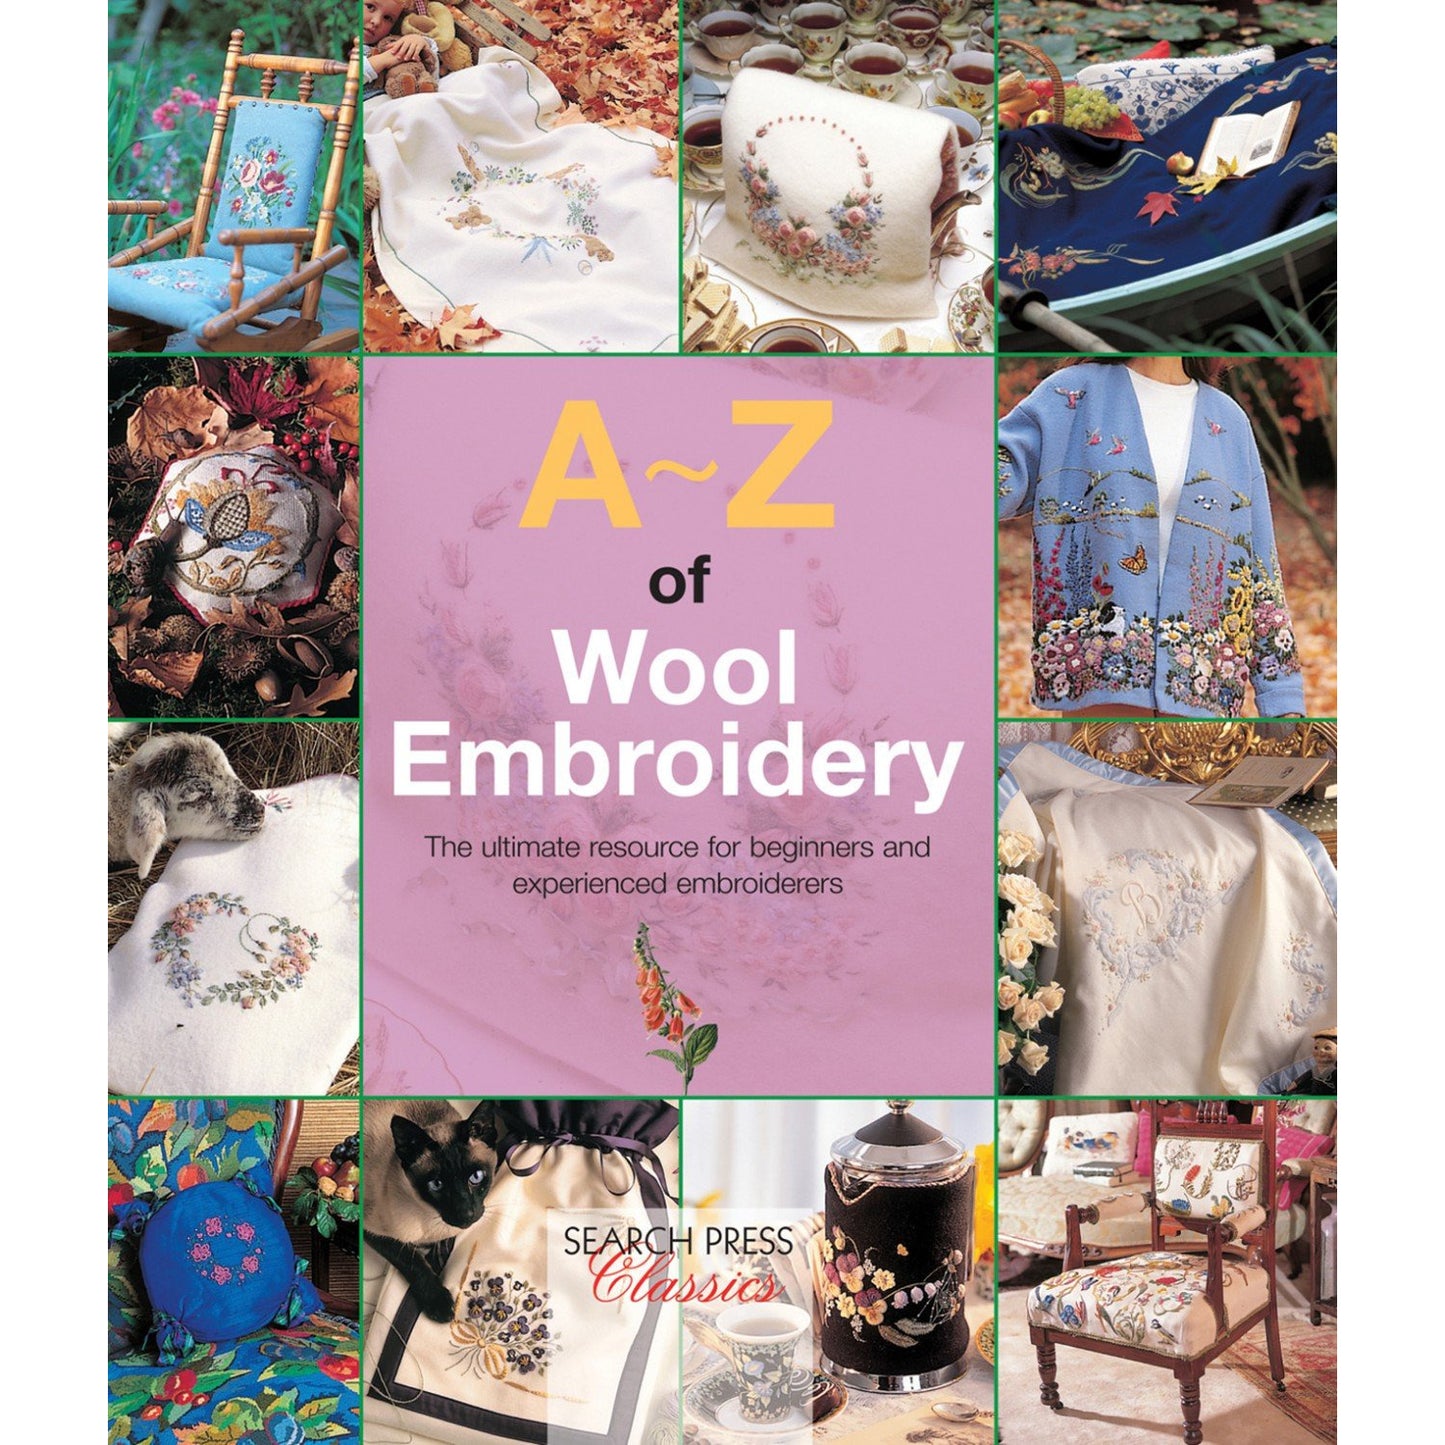 A-Z of Wool Embroidery